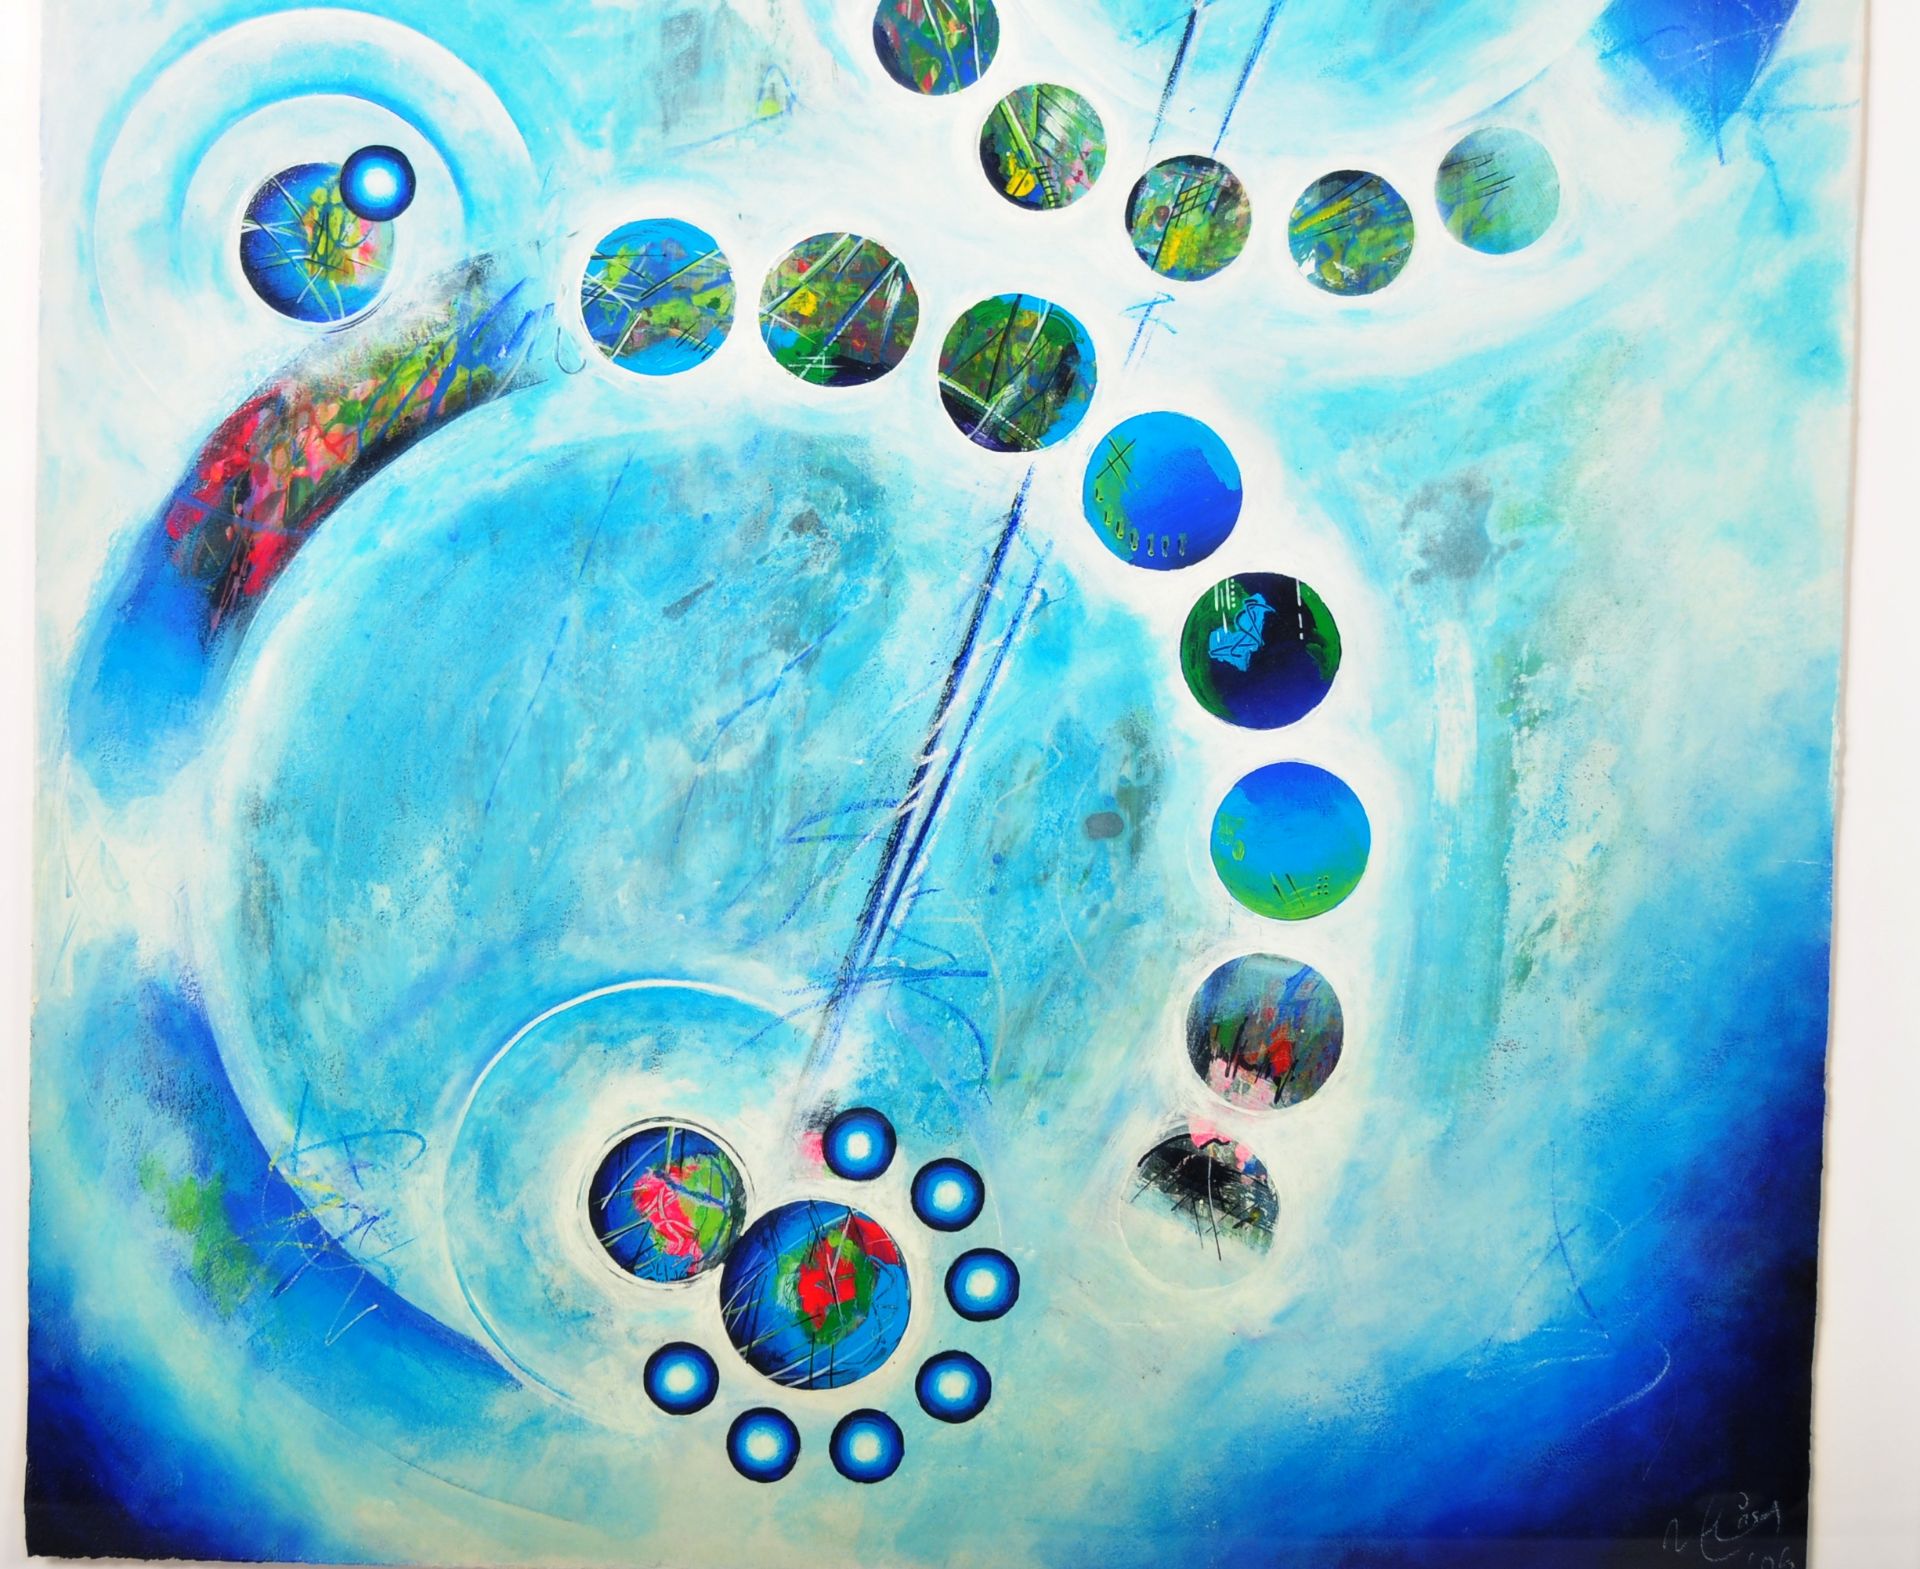 CONTEMPORARY MIXED MEDIA ABSTRACT ART PAINTING DEPICTING PLANETS - Image 3 of 5